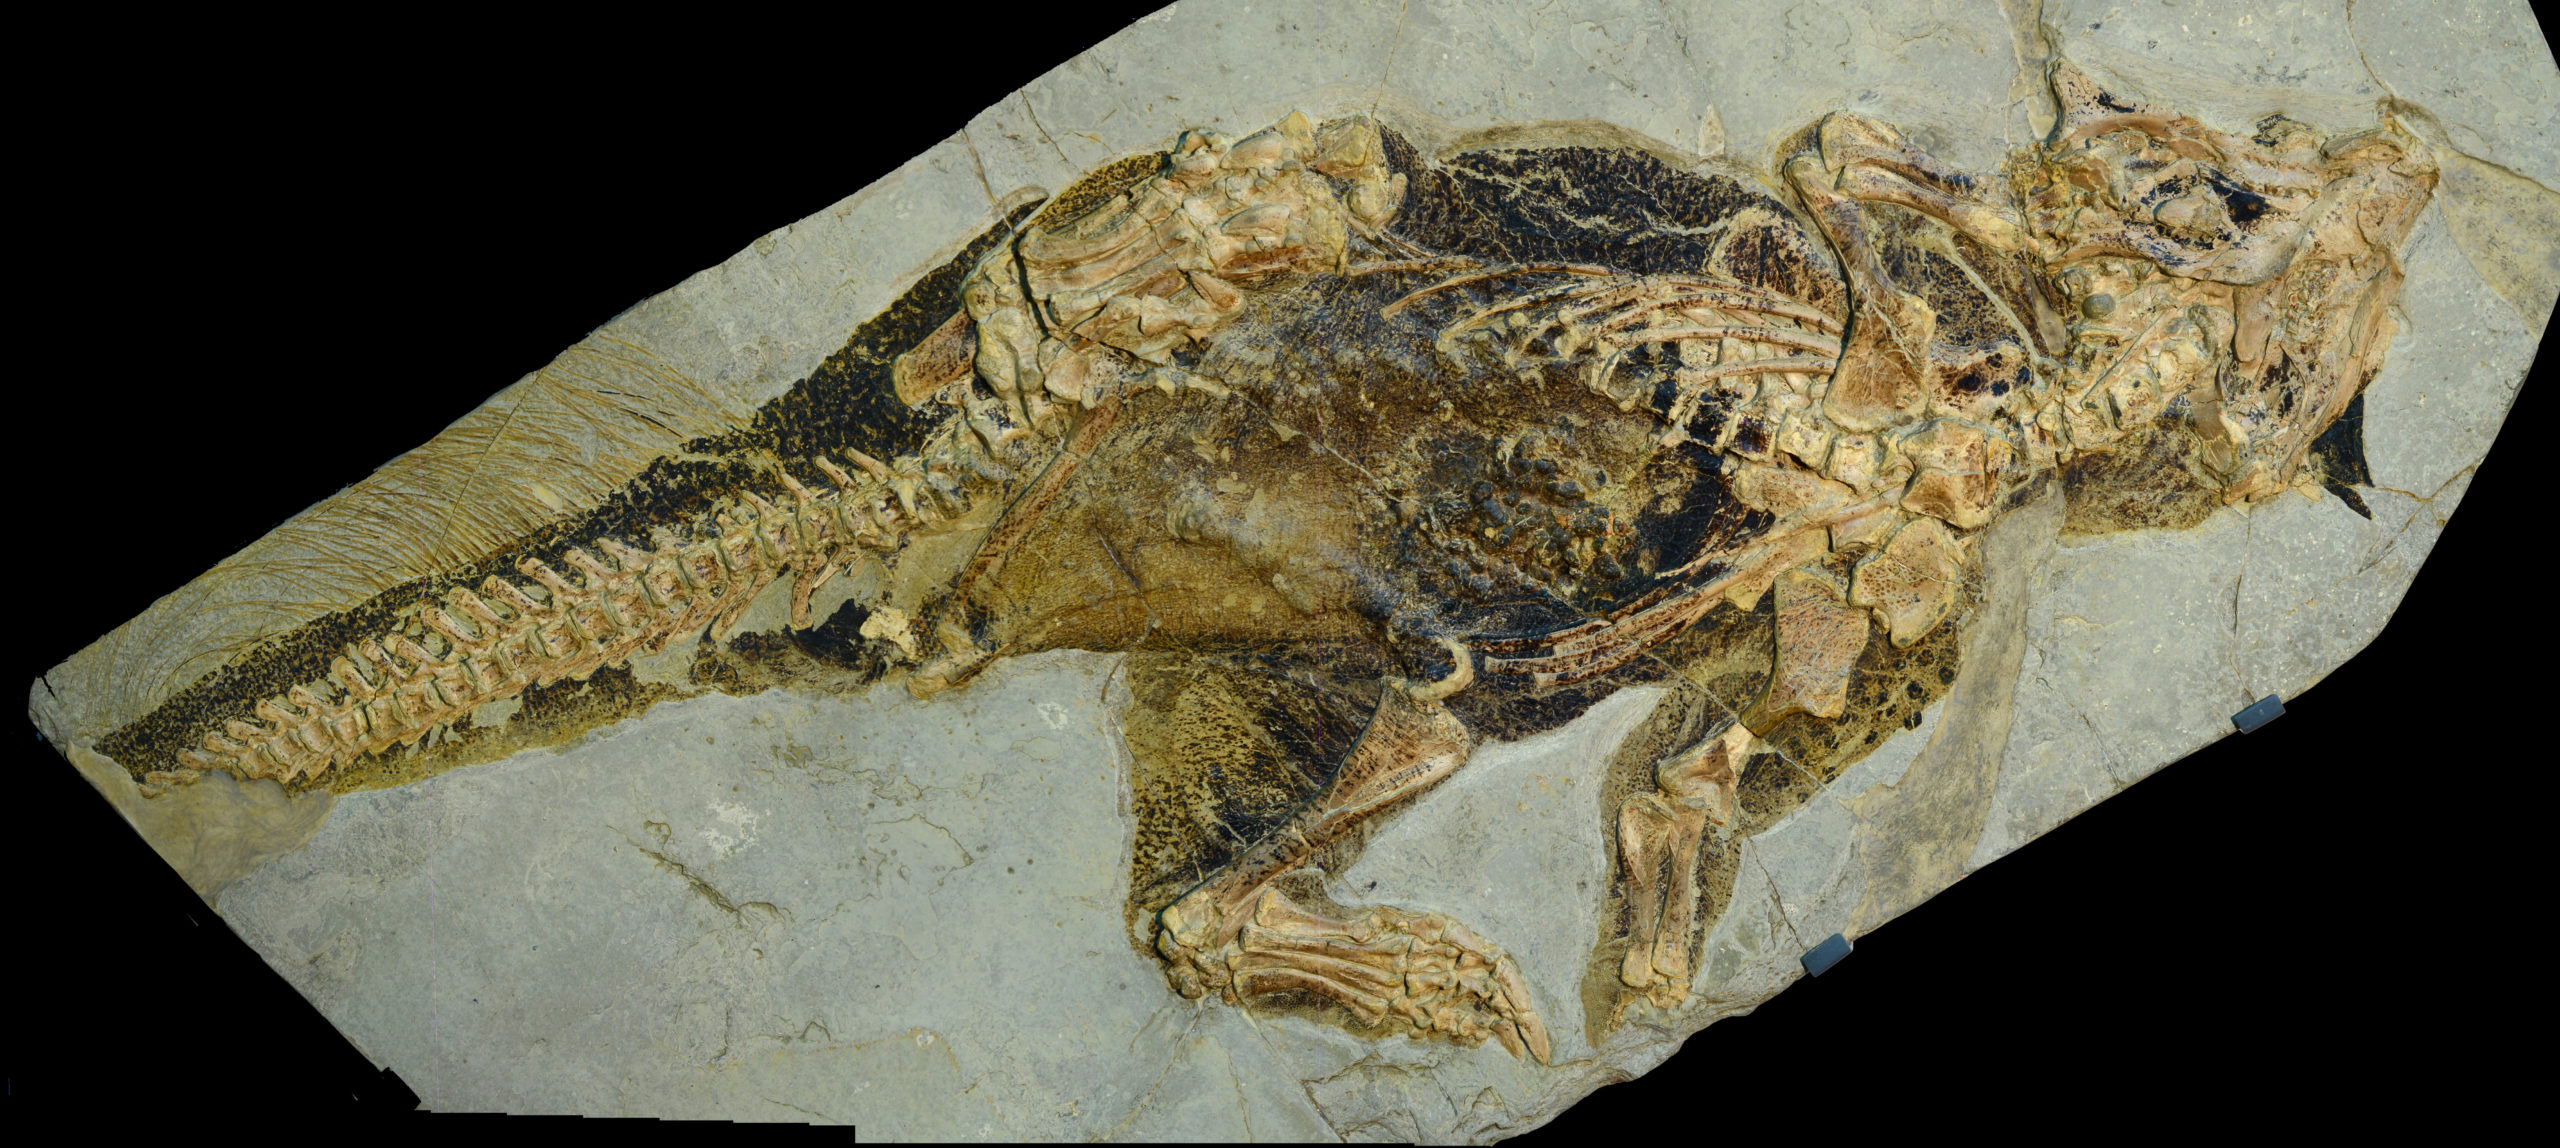 The dinosaur fossil is from China, but it is currently housed in a Frankfurt museum. (Image: Jakob Vinther)